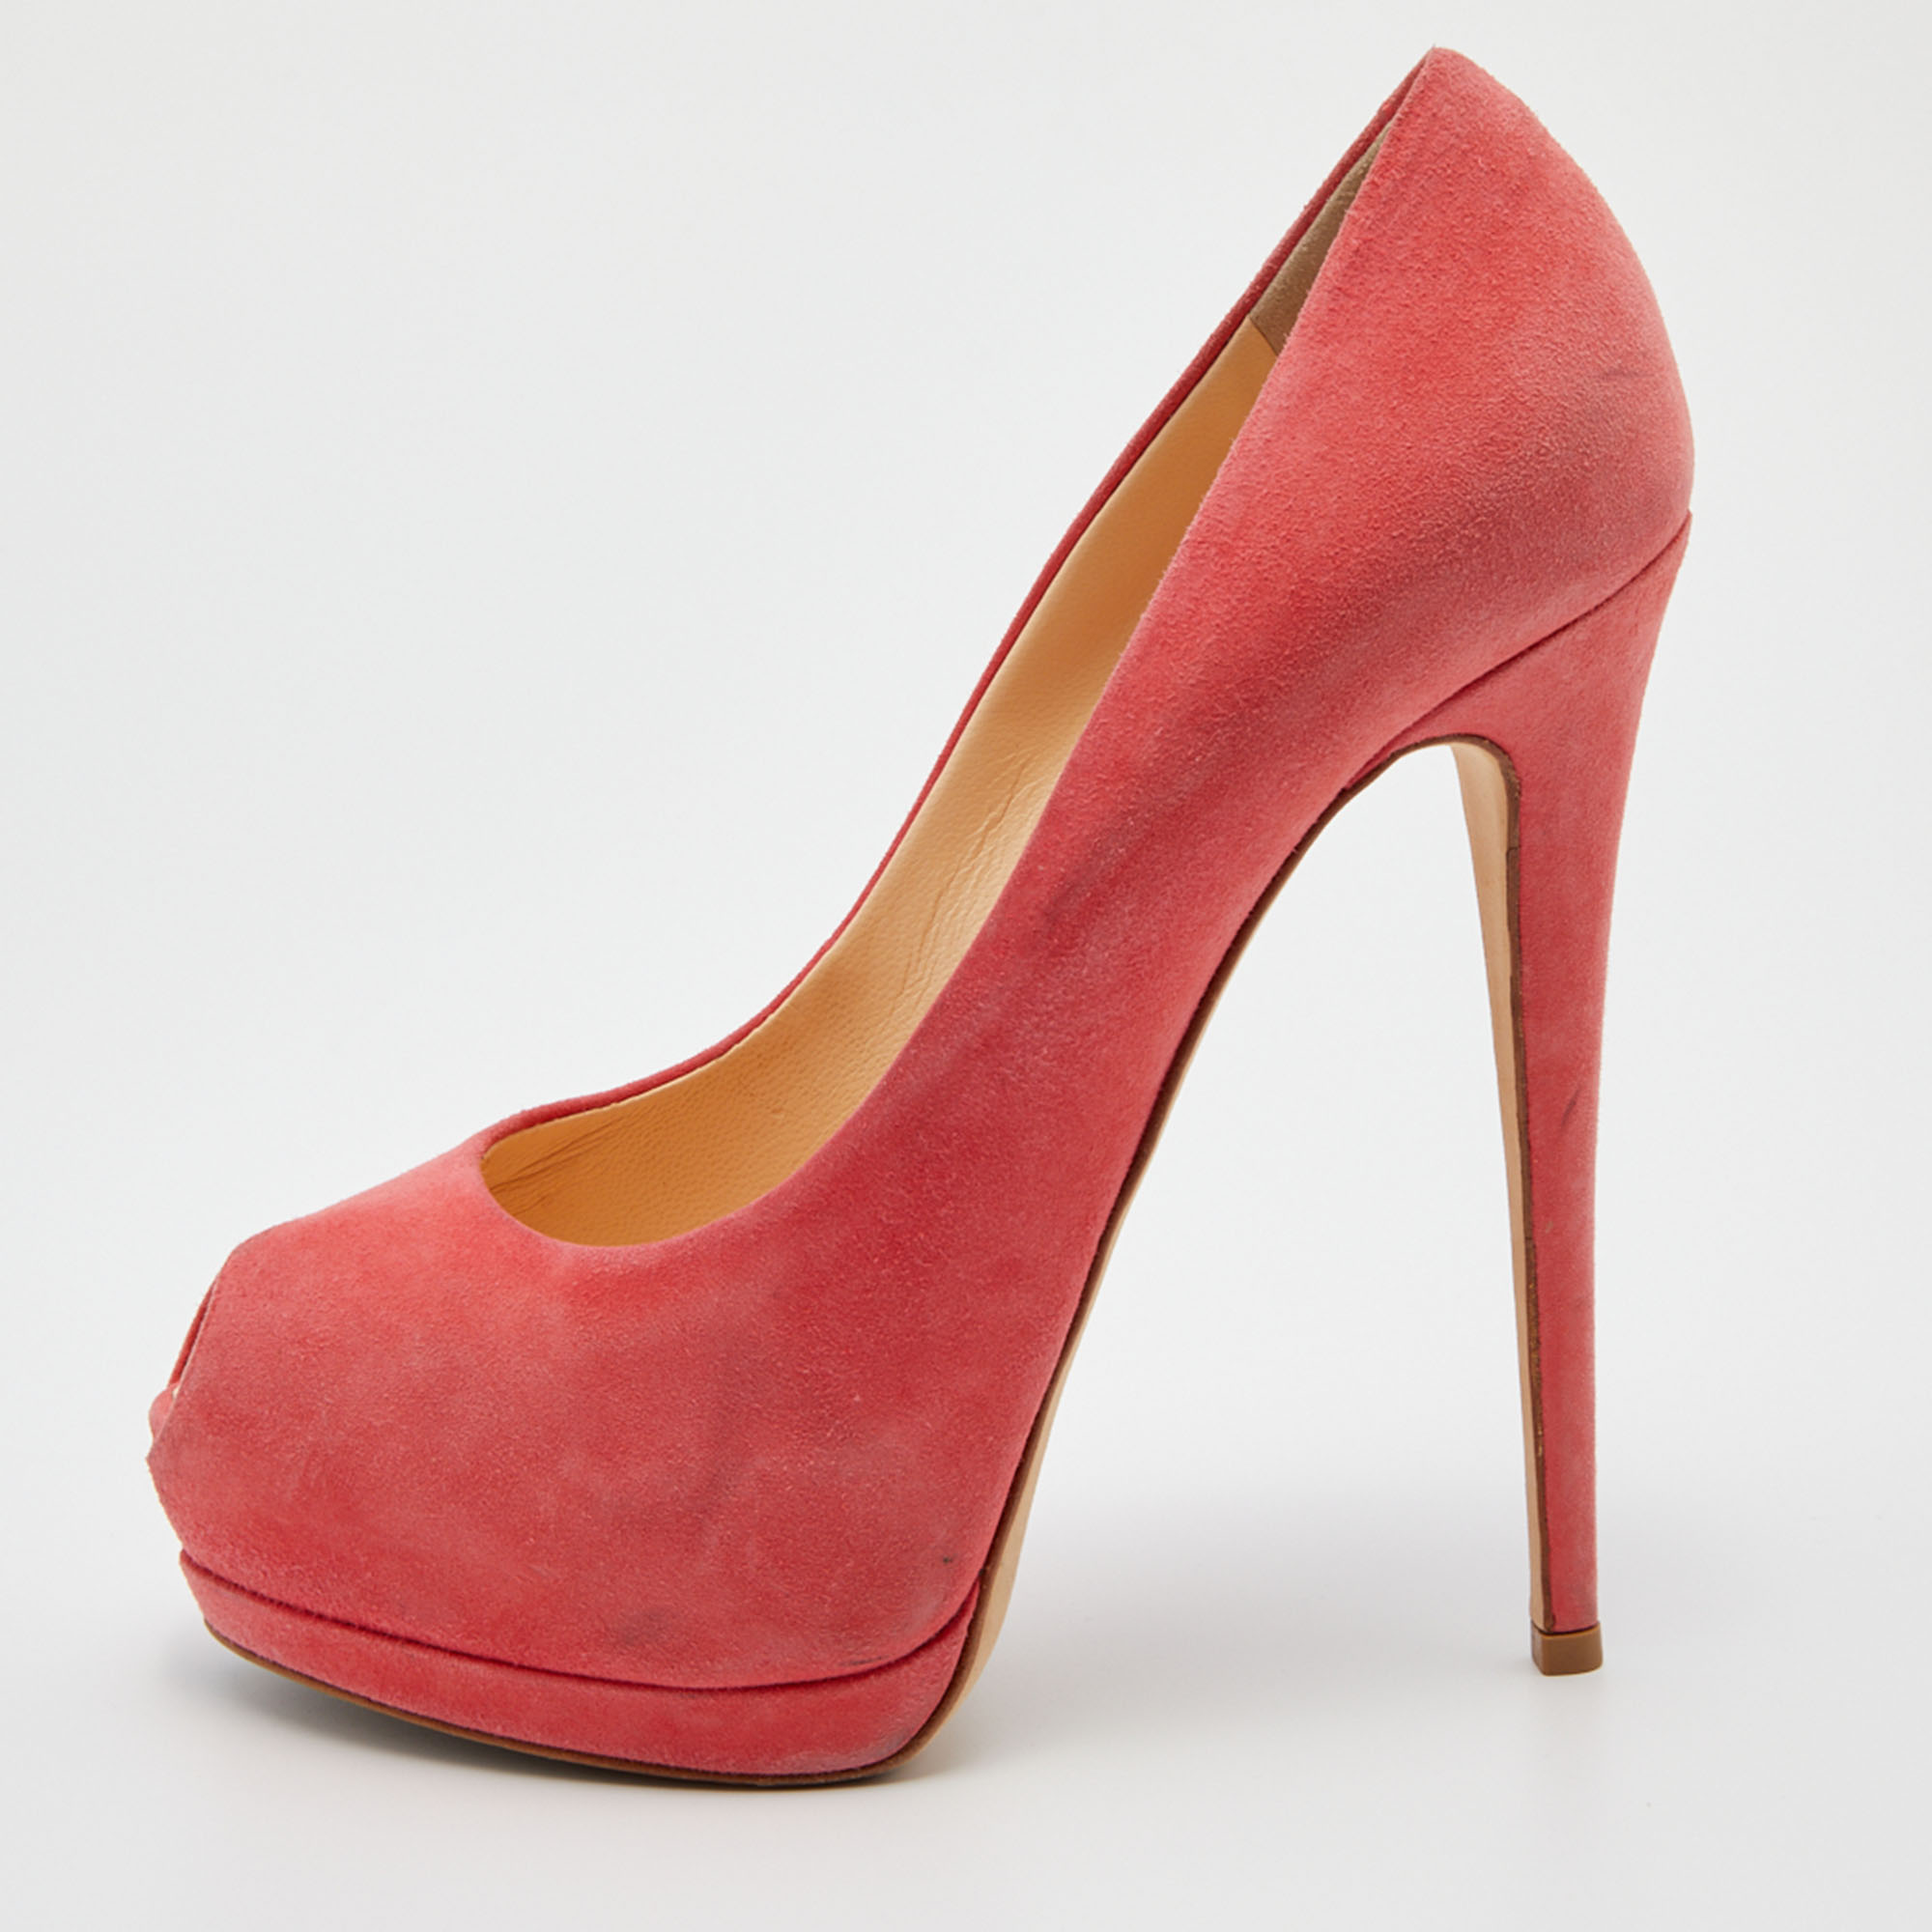 Pre-owned Giuseppe Zanotti Coral Pink Suede Sharon Peep Toe Platform Pumps Size 39